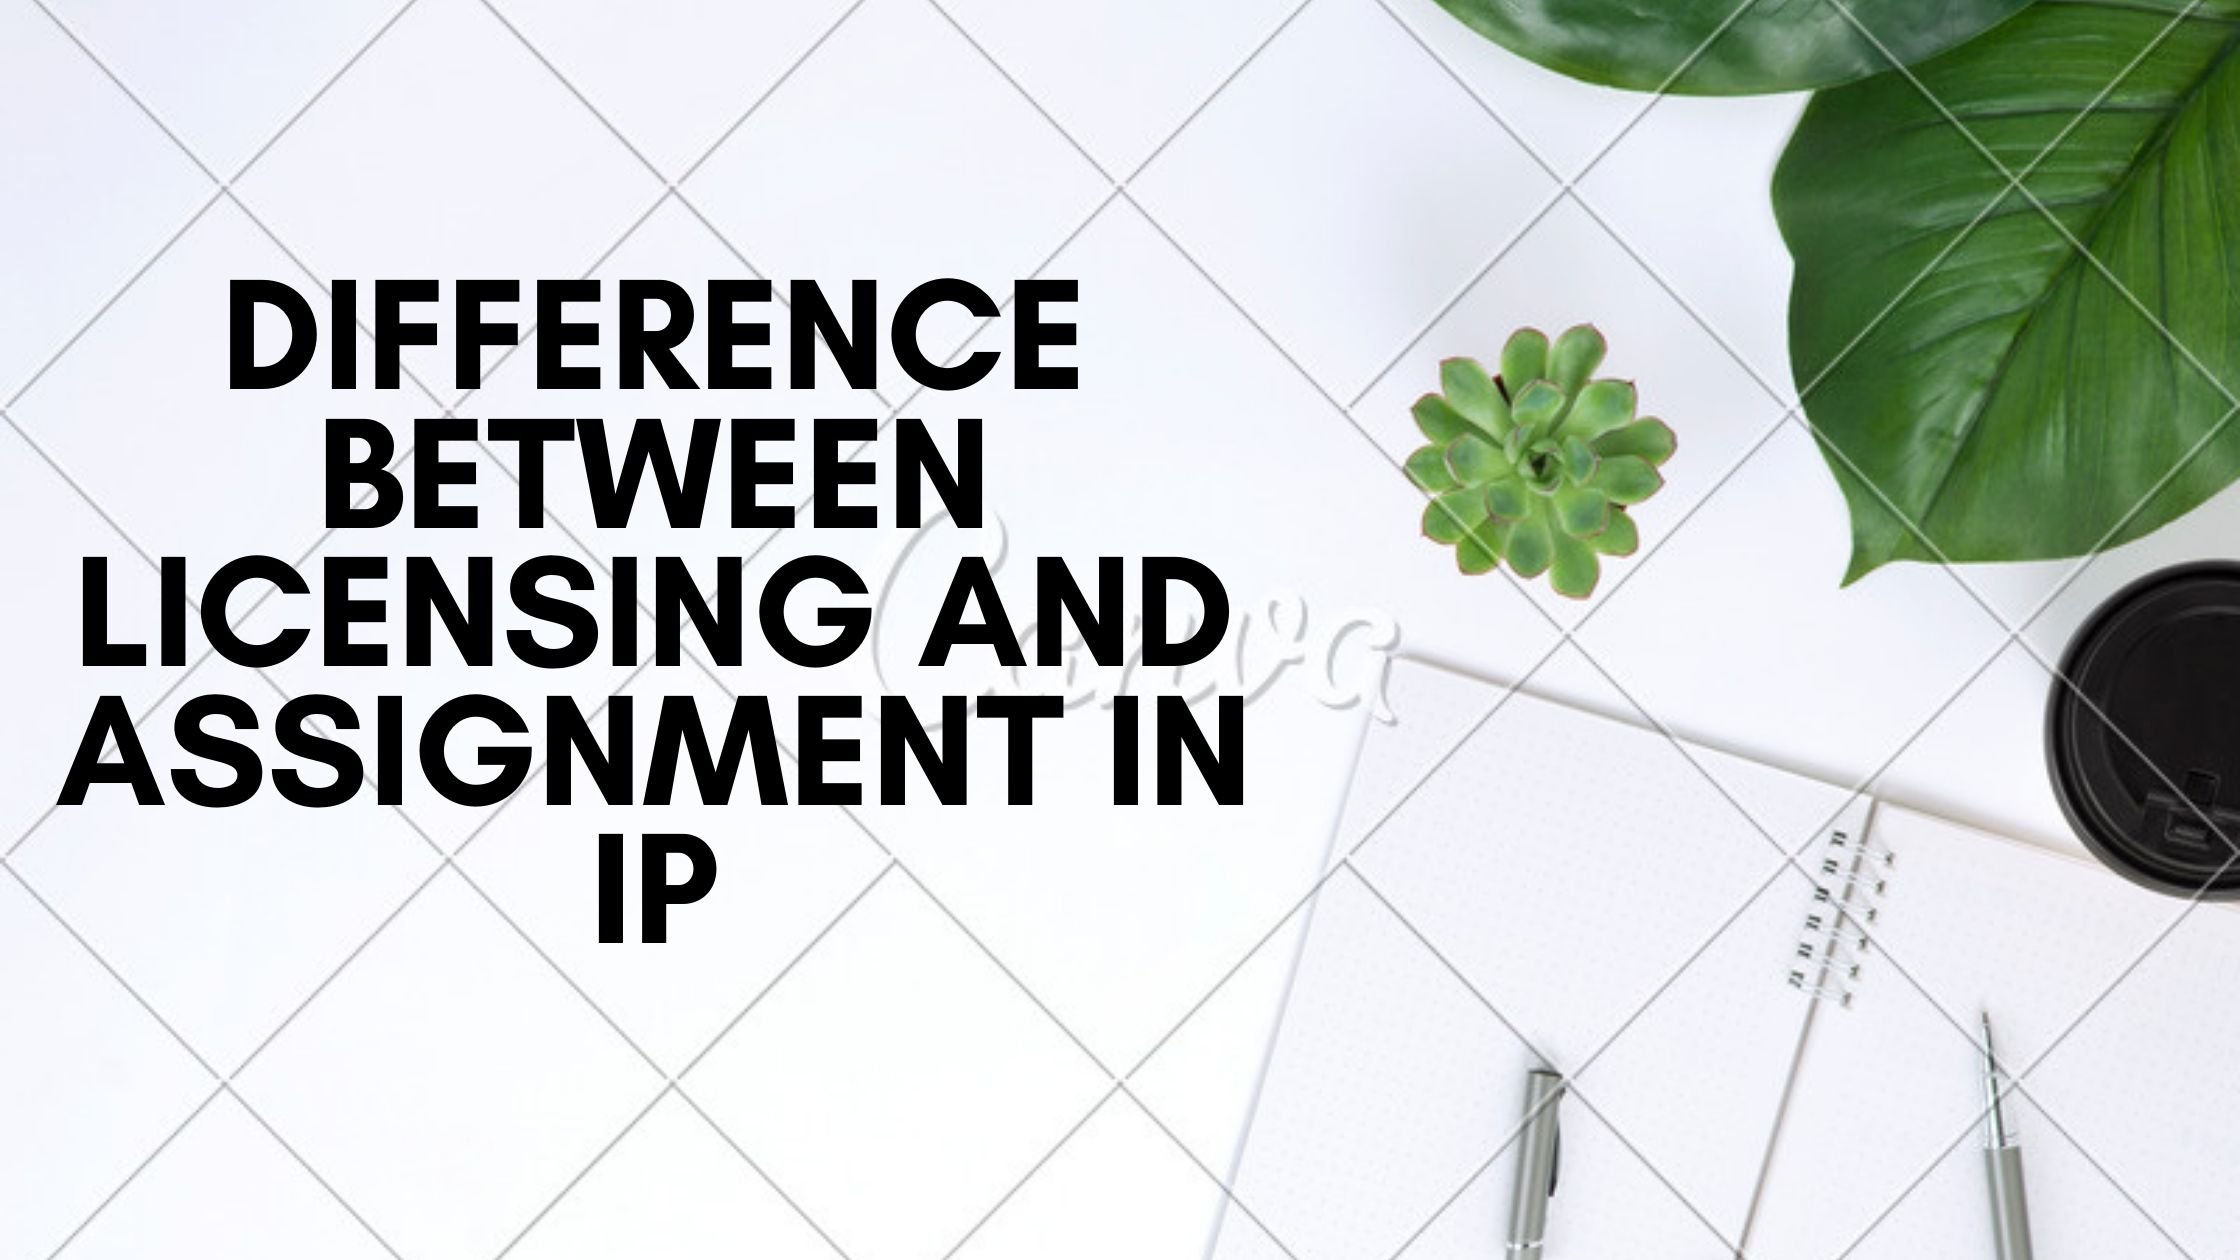 DIFFERENCE BETWEEN LICENSING AND ASSIGNMENT IN IP